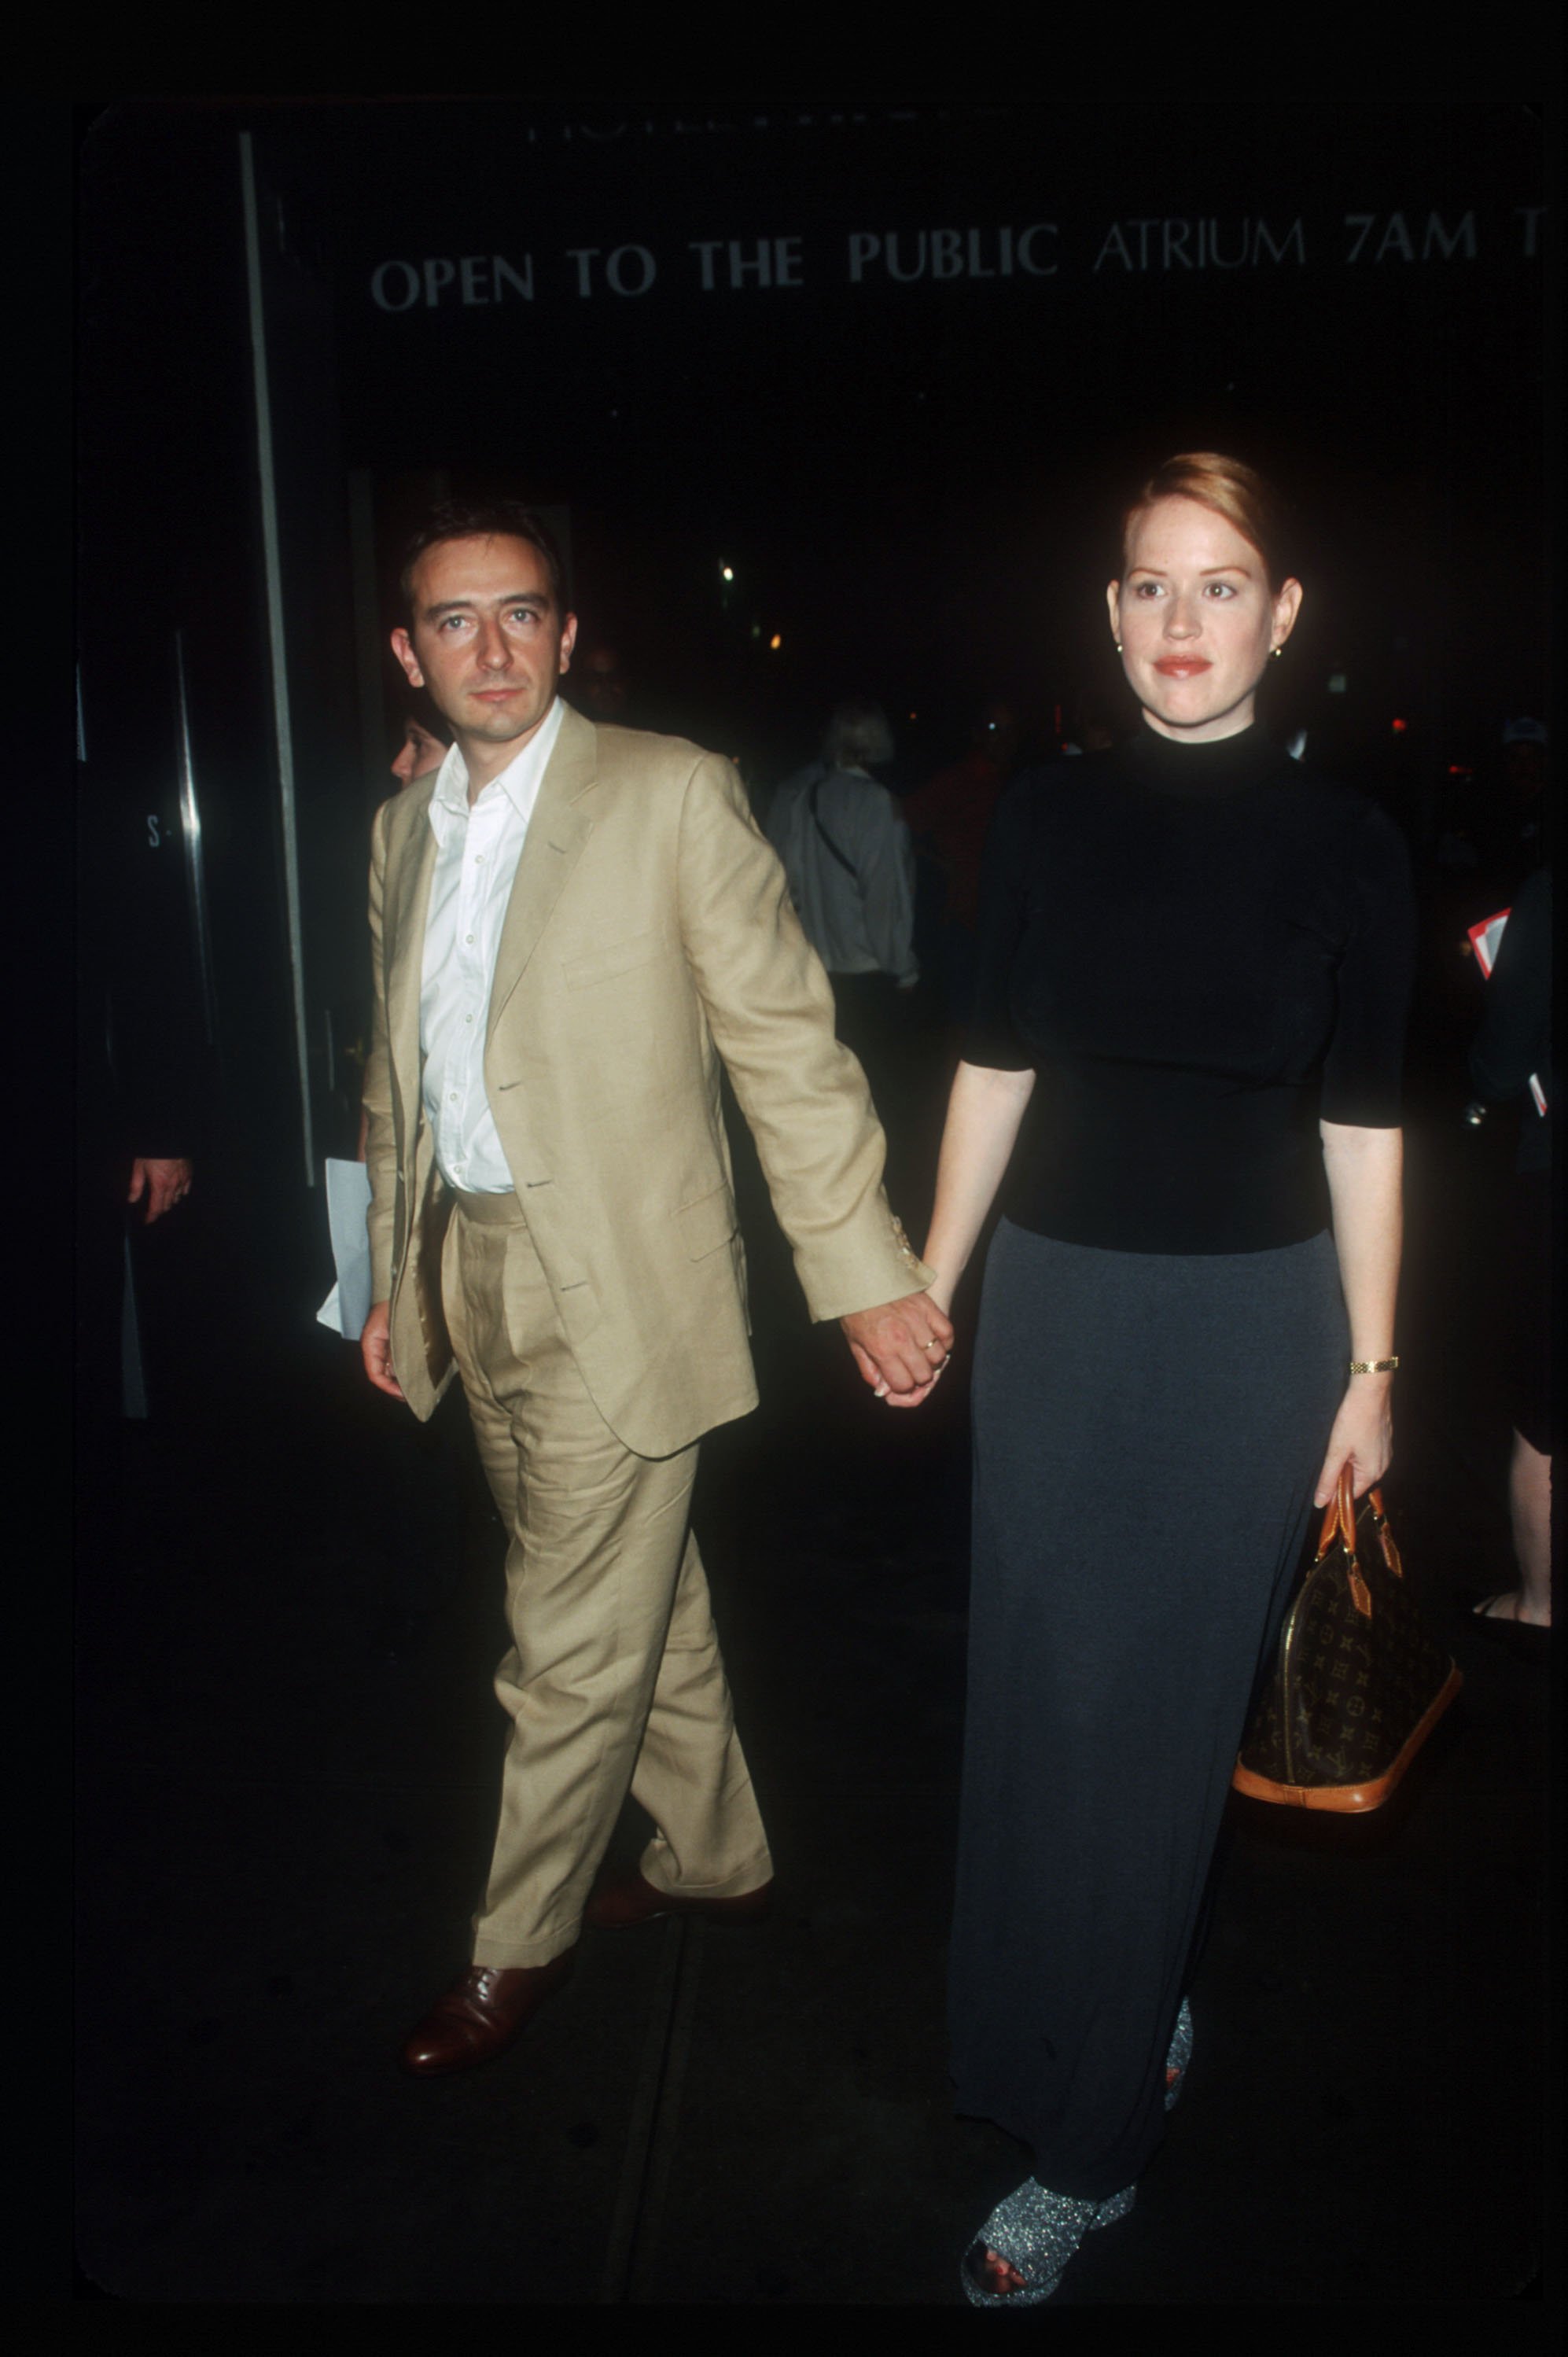 Molly Ringwald and Valery Lameignère attend the premiere of "Guinevere" September 7, 1999, in New York City. | Source: Getty Images